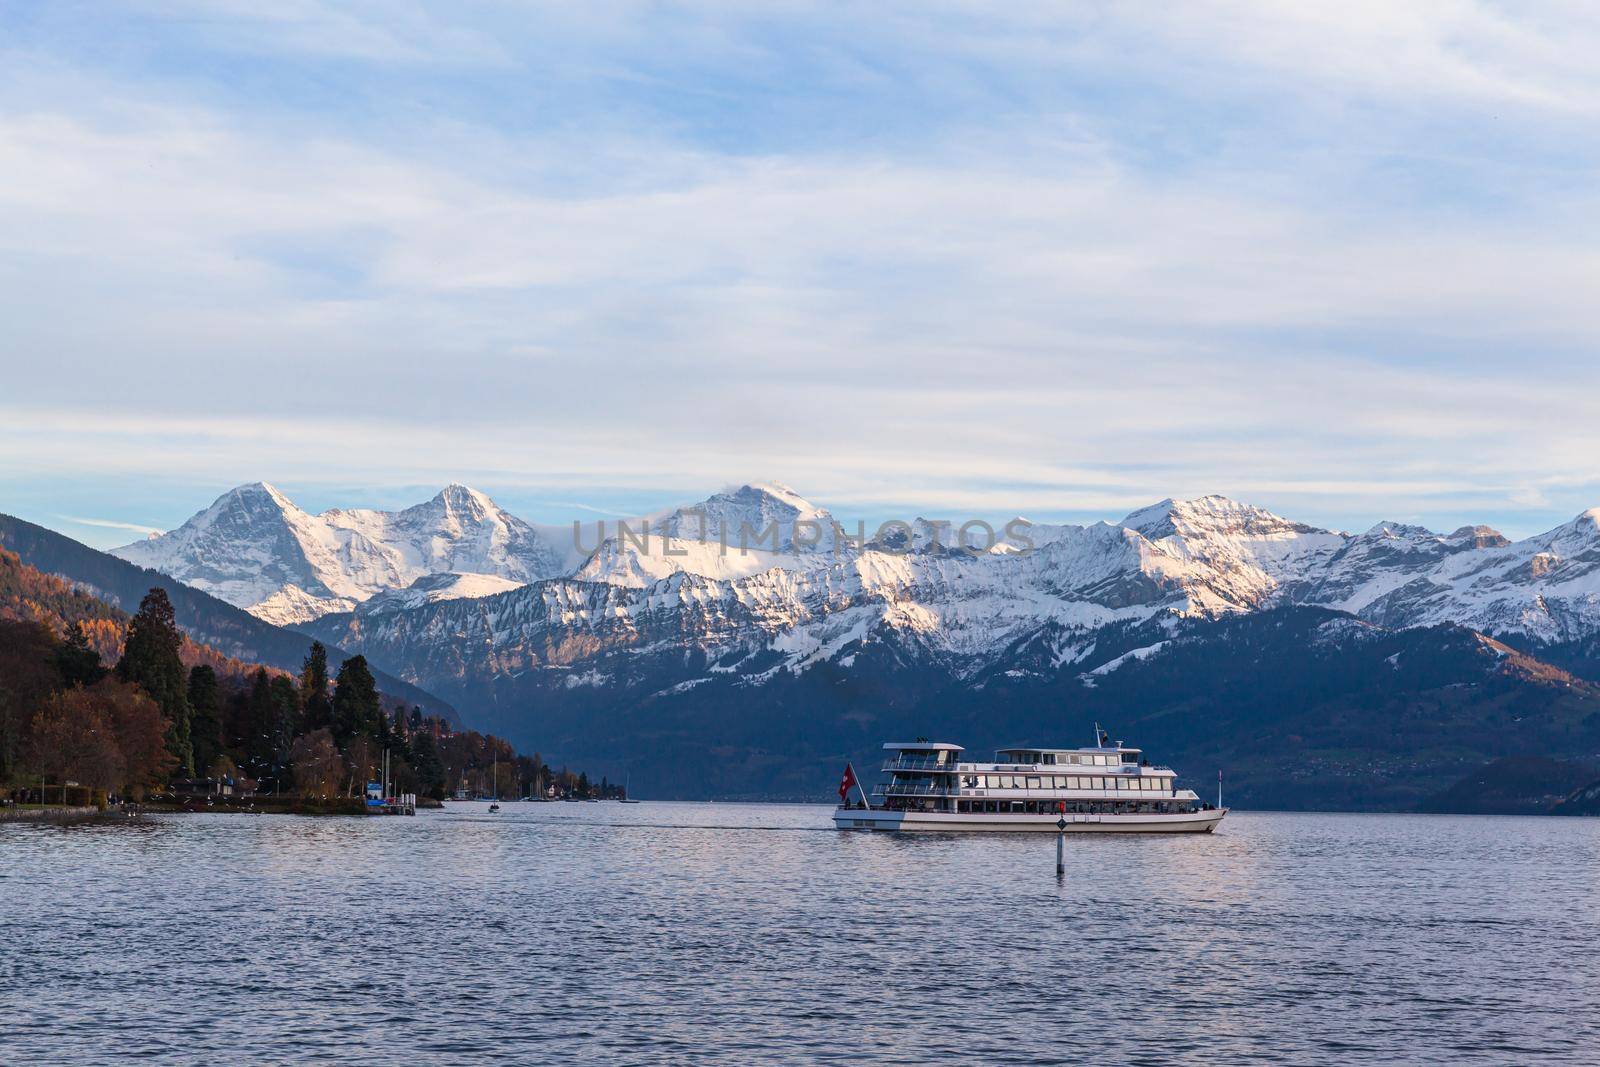 Stunning panorama view of famous Swiss Alps peaks on Bernese Oberland Eiger North Face, Monch, Jungfrau at dusk from Lake Thun (Thunersee) on sunny autumn day with cruise ship, Bern, Switzerland